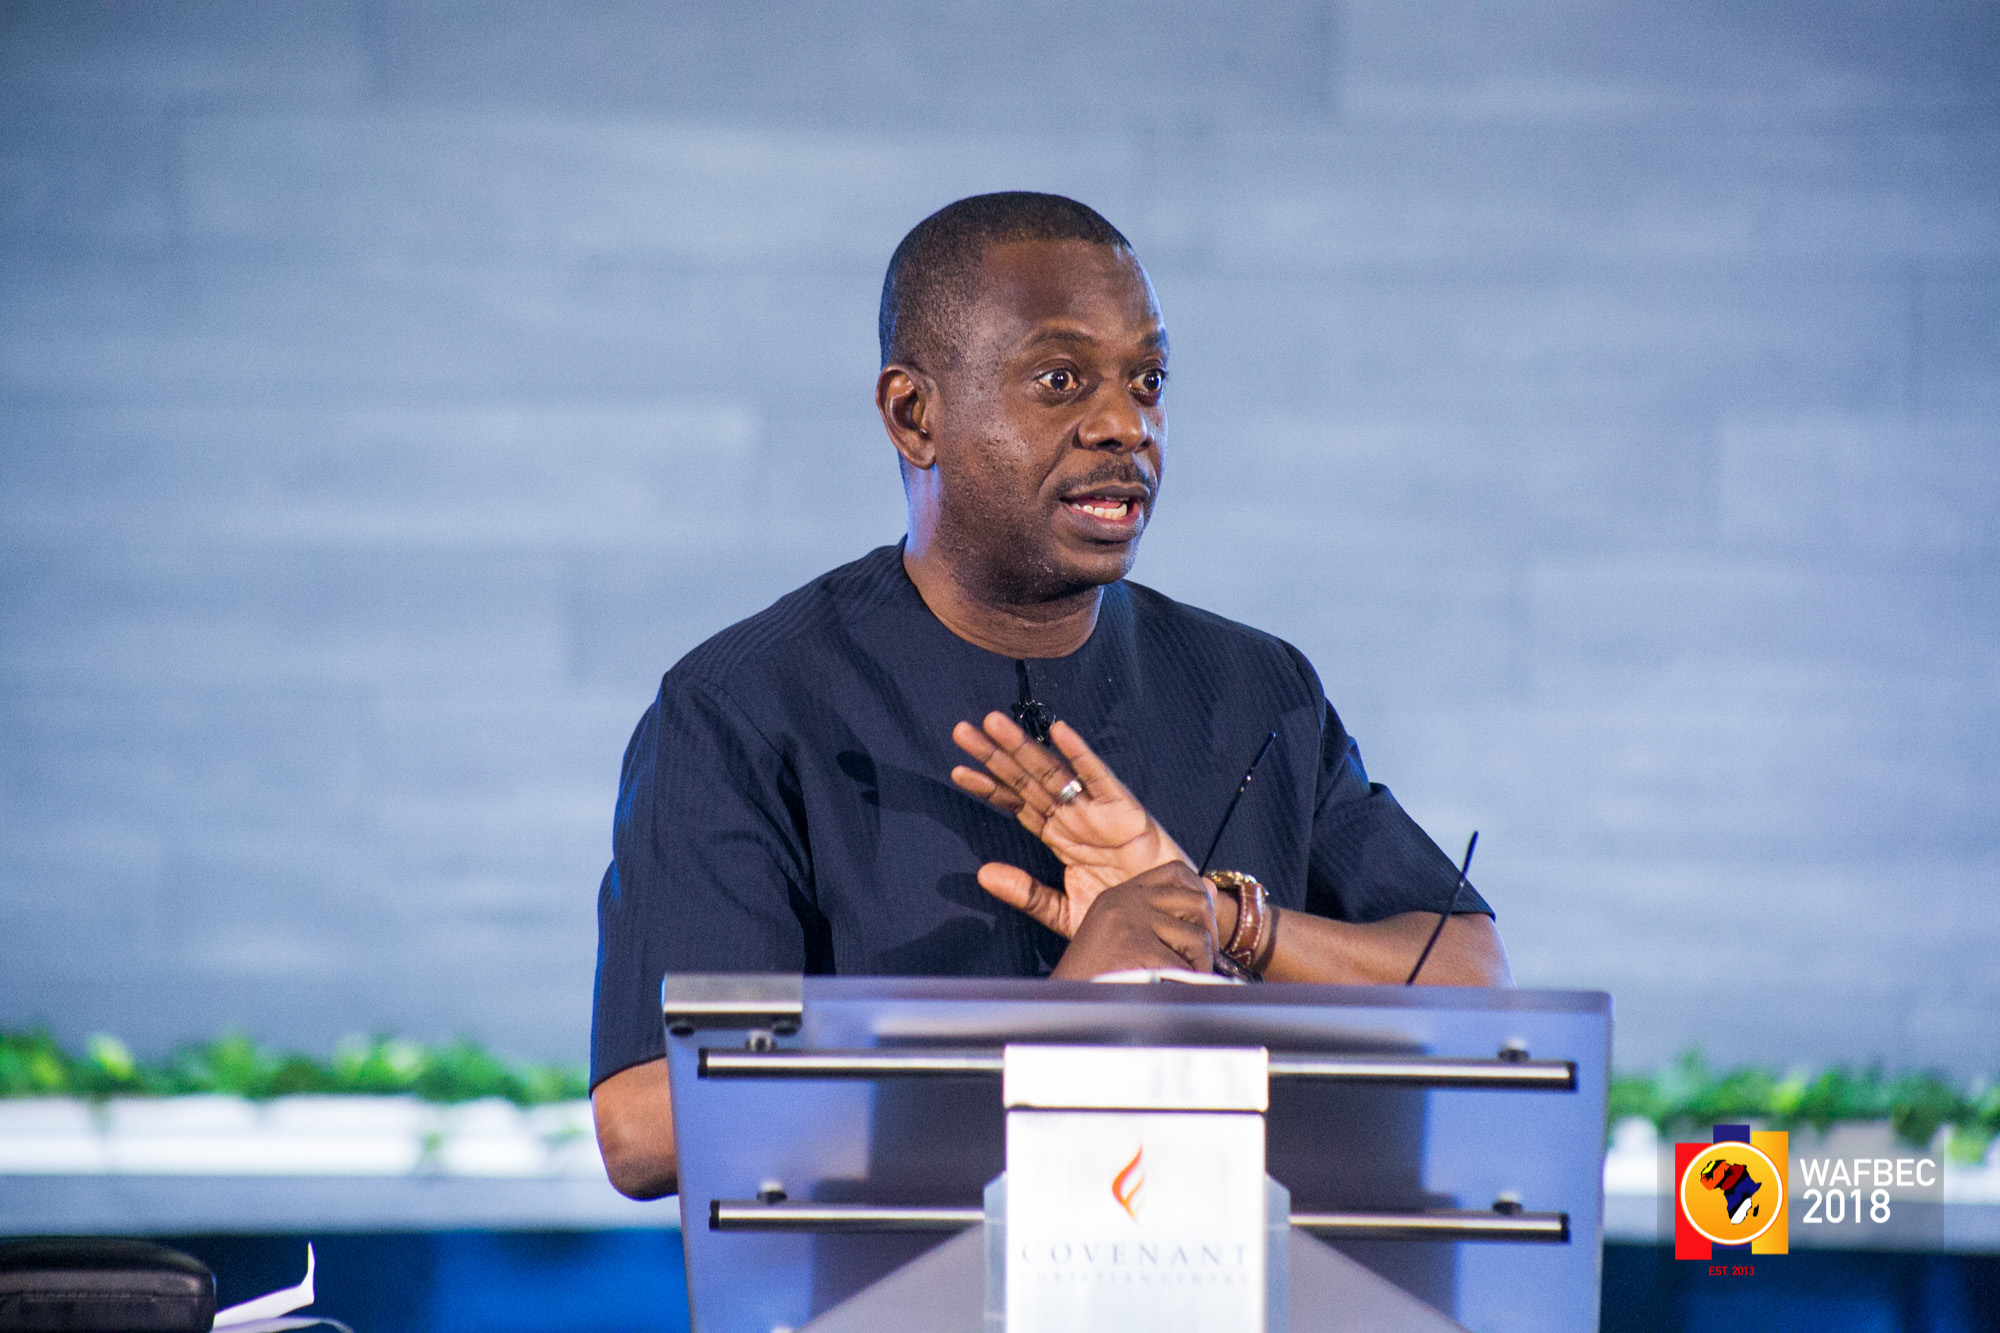 WAFBEC 2018 – Day 6  (Afternoon Session 2) with Pastor ‘Poju Oyemade